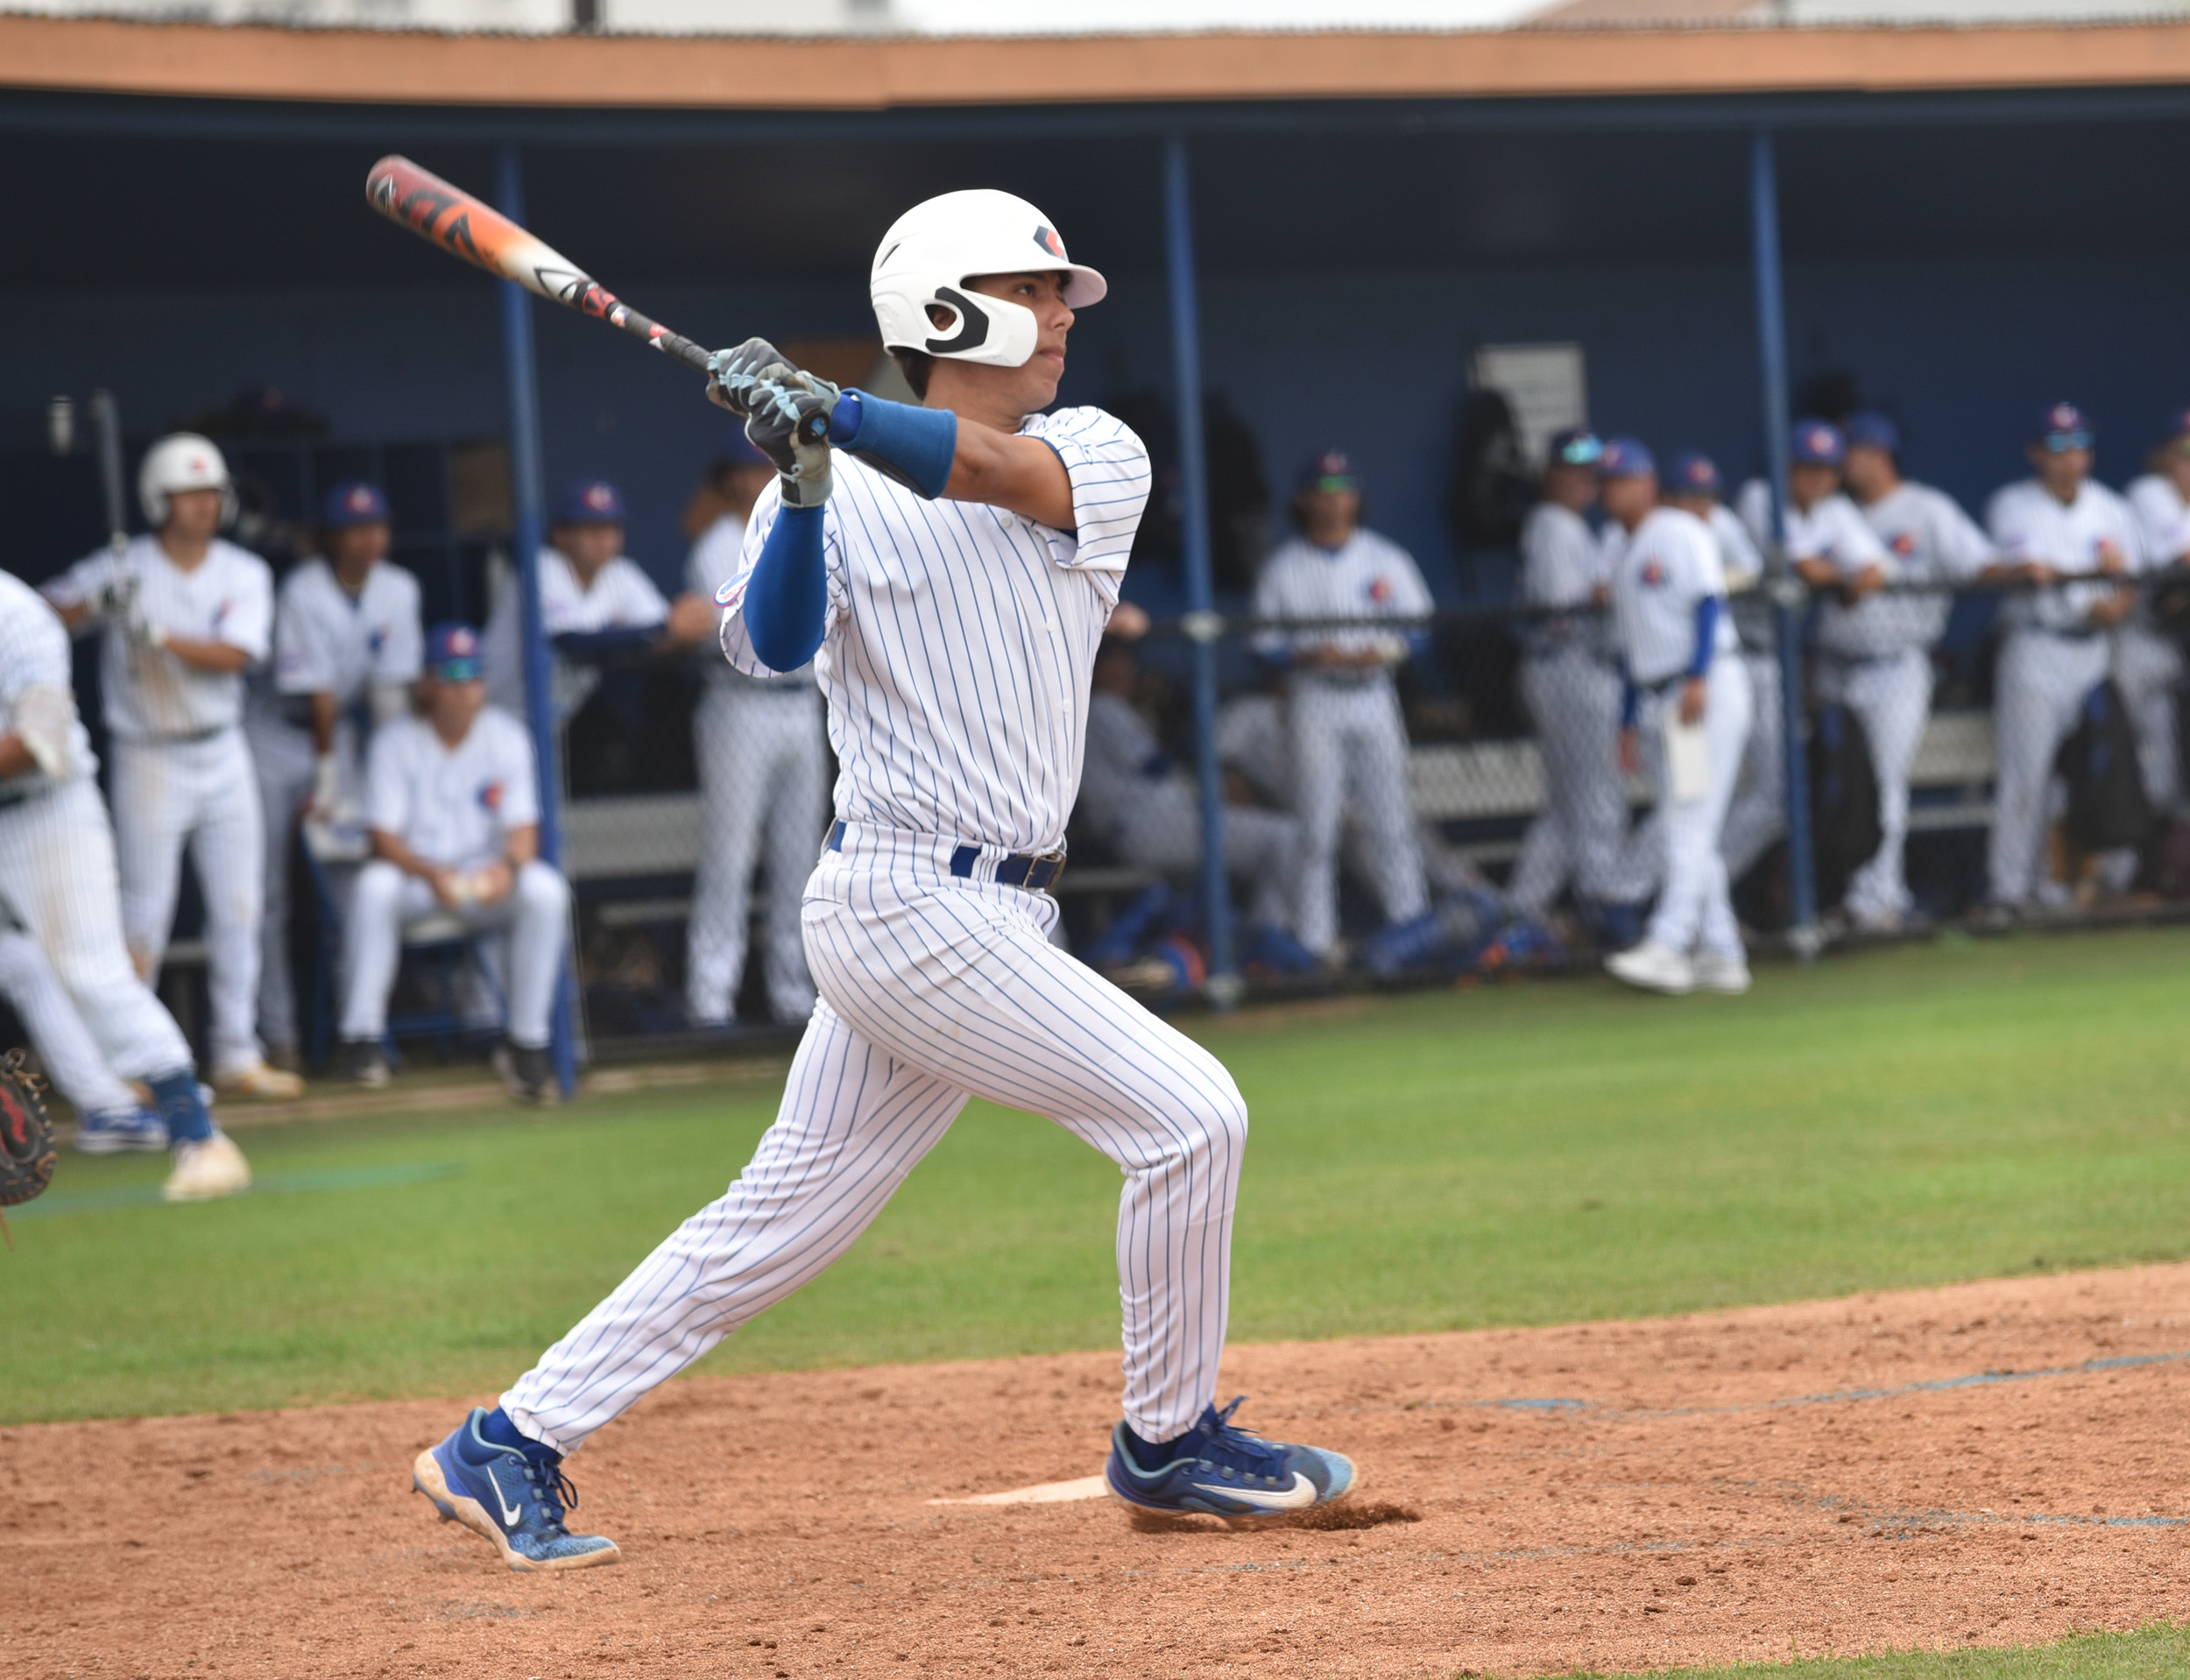 Galveston College Whitecaps sophomore infielder Hector Rodriguez bats against the Coastal Bend Cougars Thursday, March 2, 2023 during a National Junior College Athletic Association Division I, Region 14 conference game at Bernard Davis Field in Galveston. (Courtesy Photo/Galveston College)